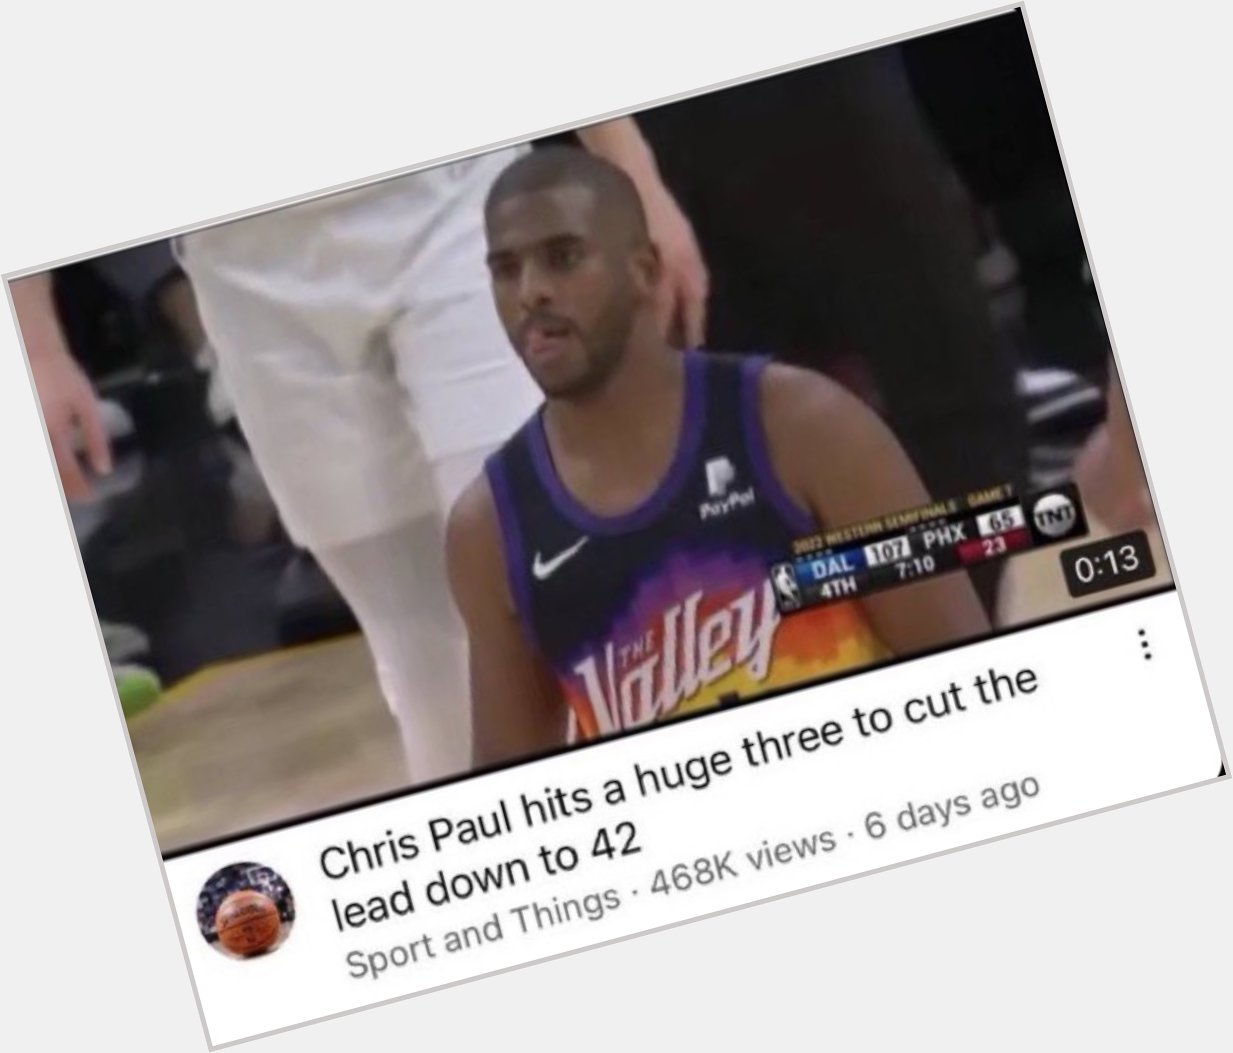 Late happy birthday to Chris Paul the funniest player in the history of the league  